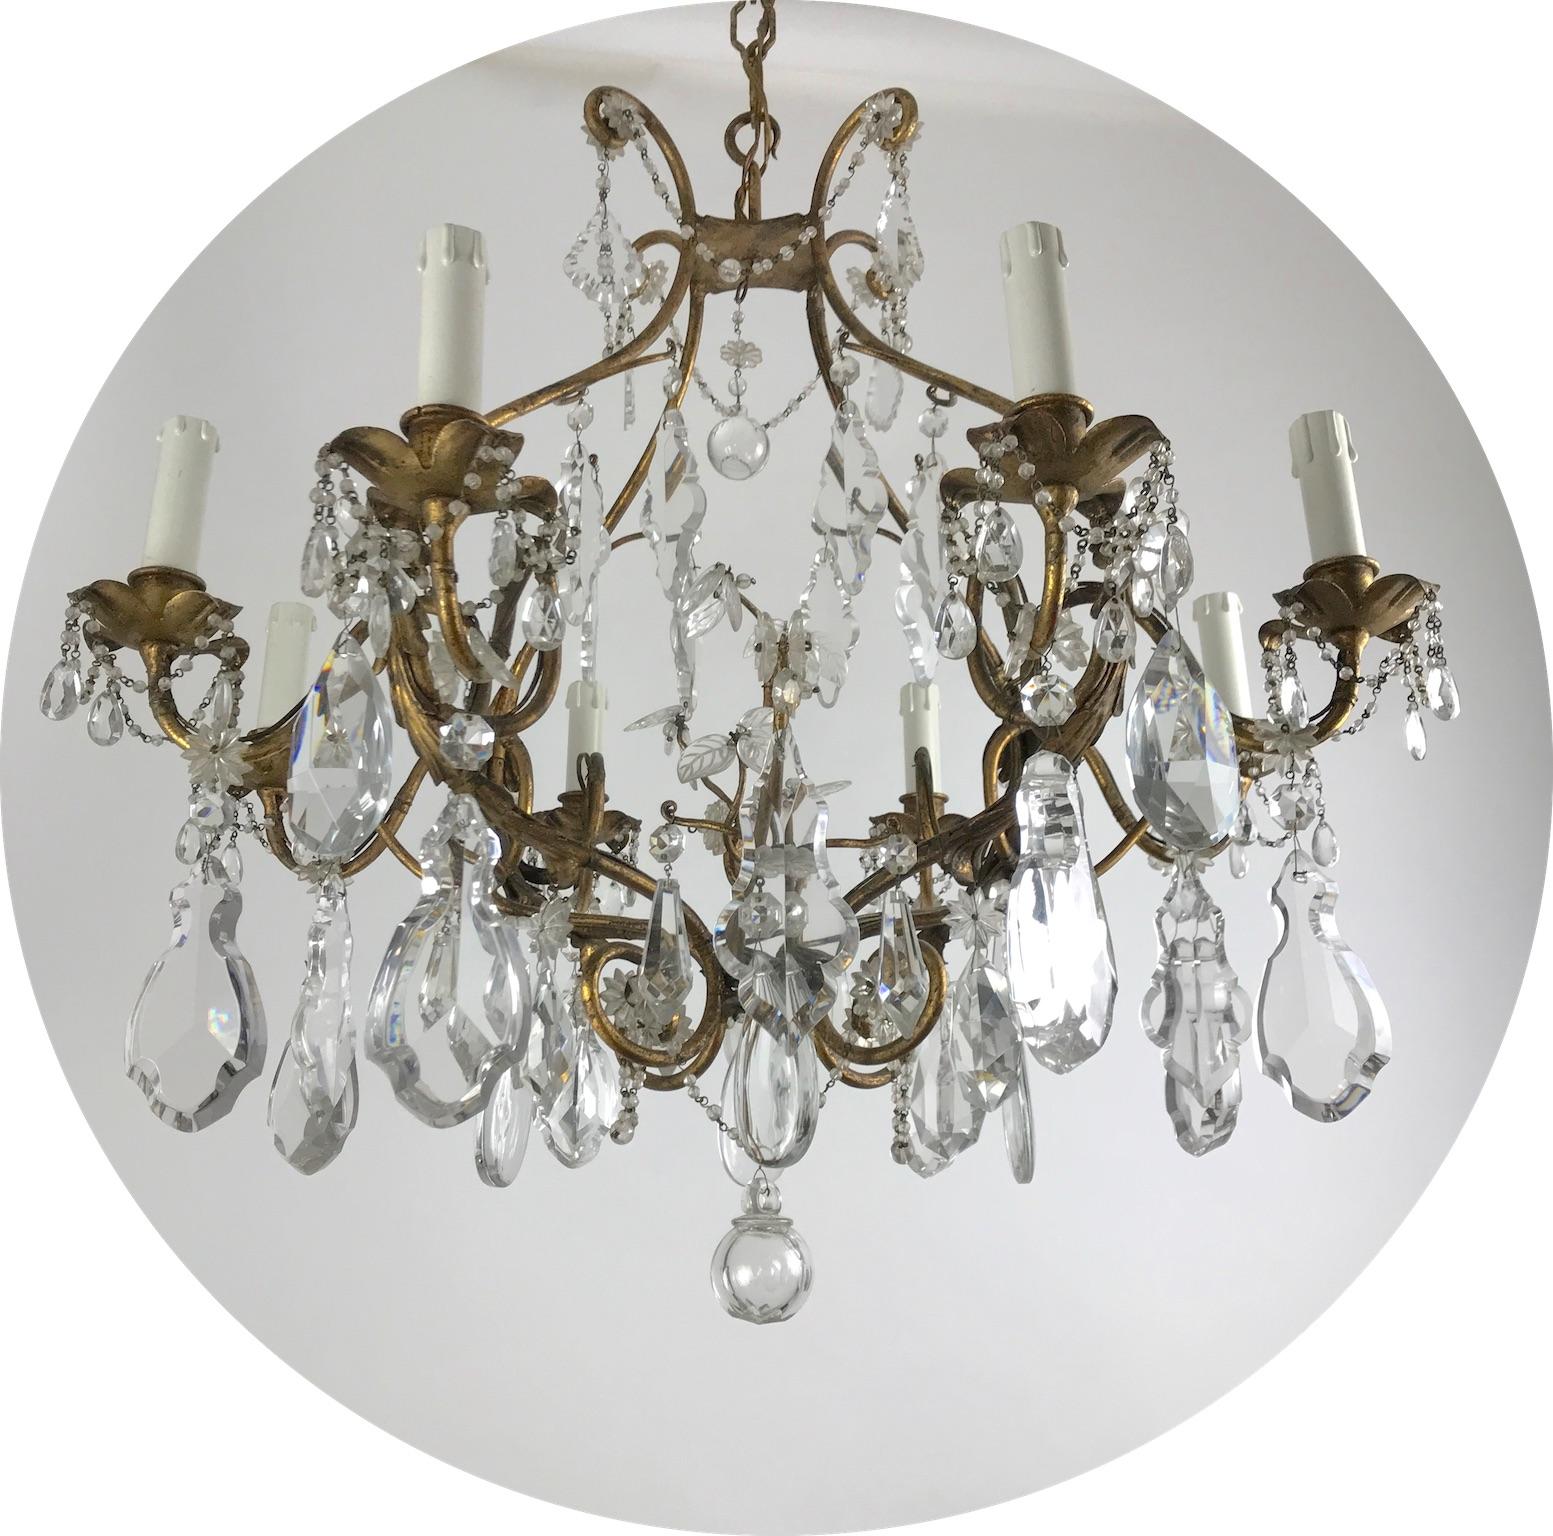 Forged Mid-20th Century Italian Crystal Chandelier with Gilt-leaf Iron Cage Frame